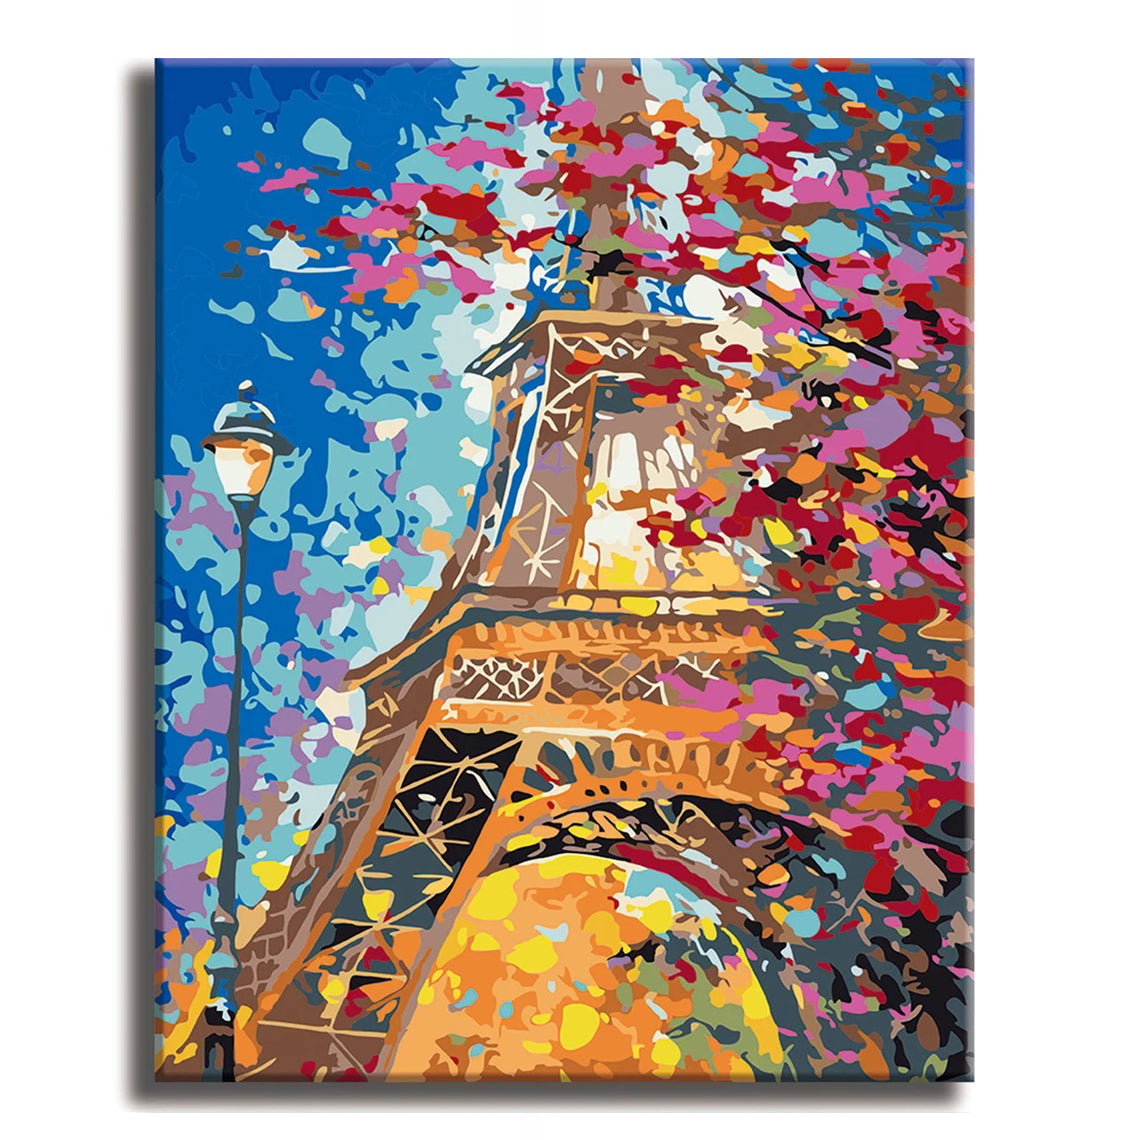 Romantic Paris - Paint by Numbers Kit for Adults DIY Oil Painting